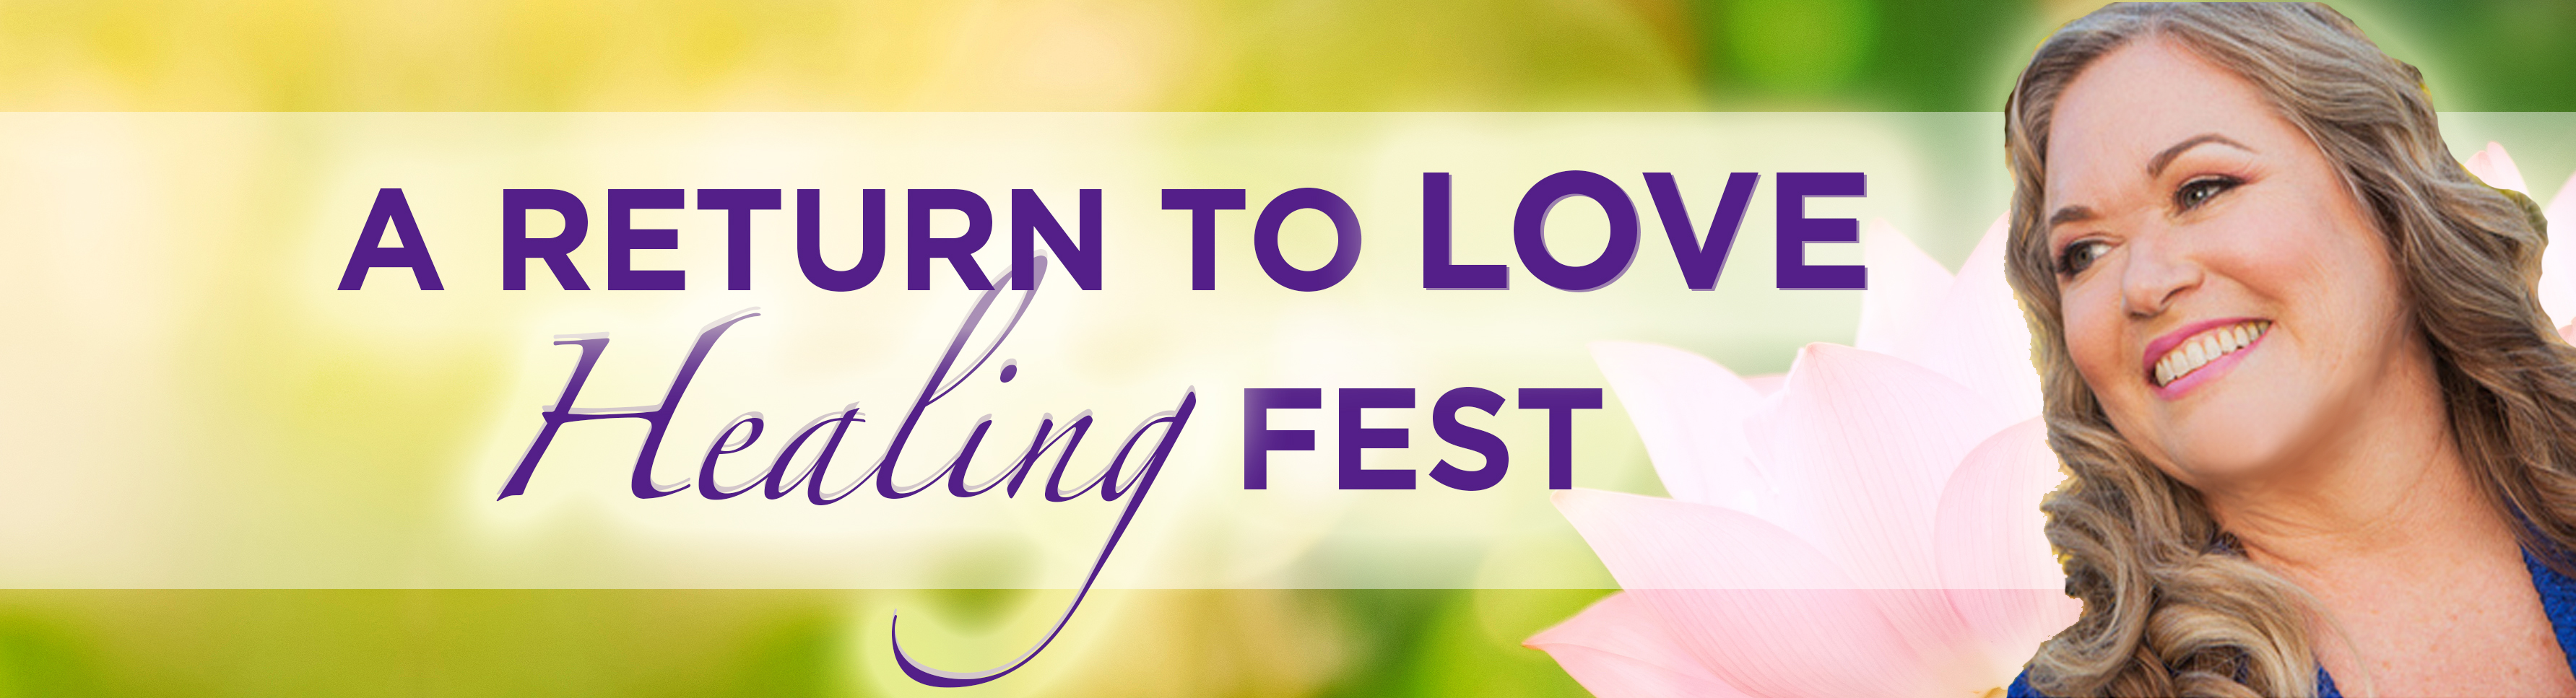 RETURN TO LOVE HEALING FEST WITH MARY A HALL